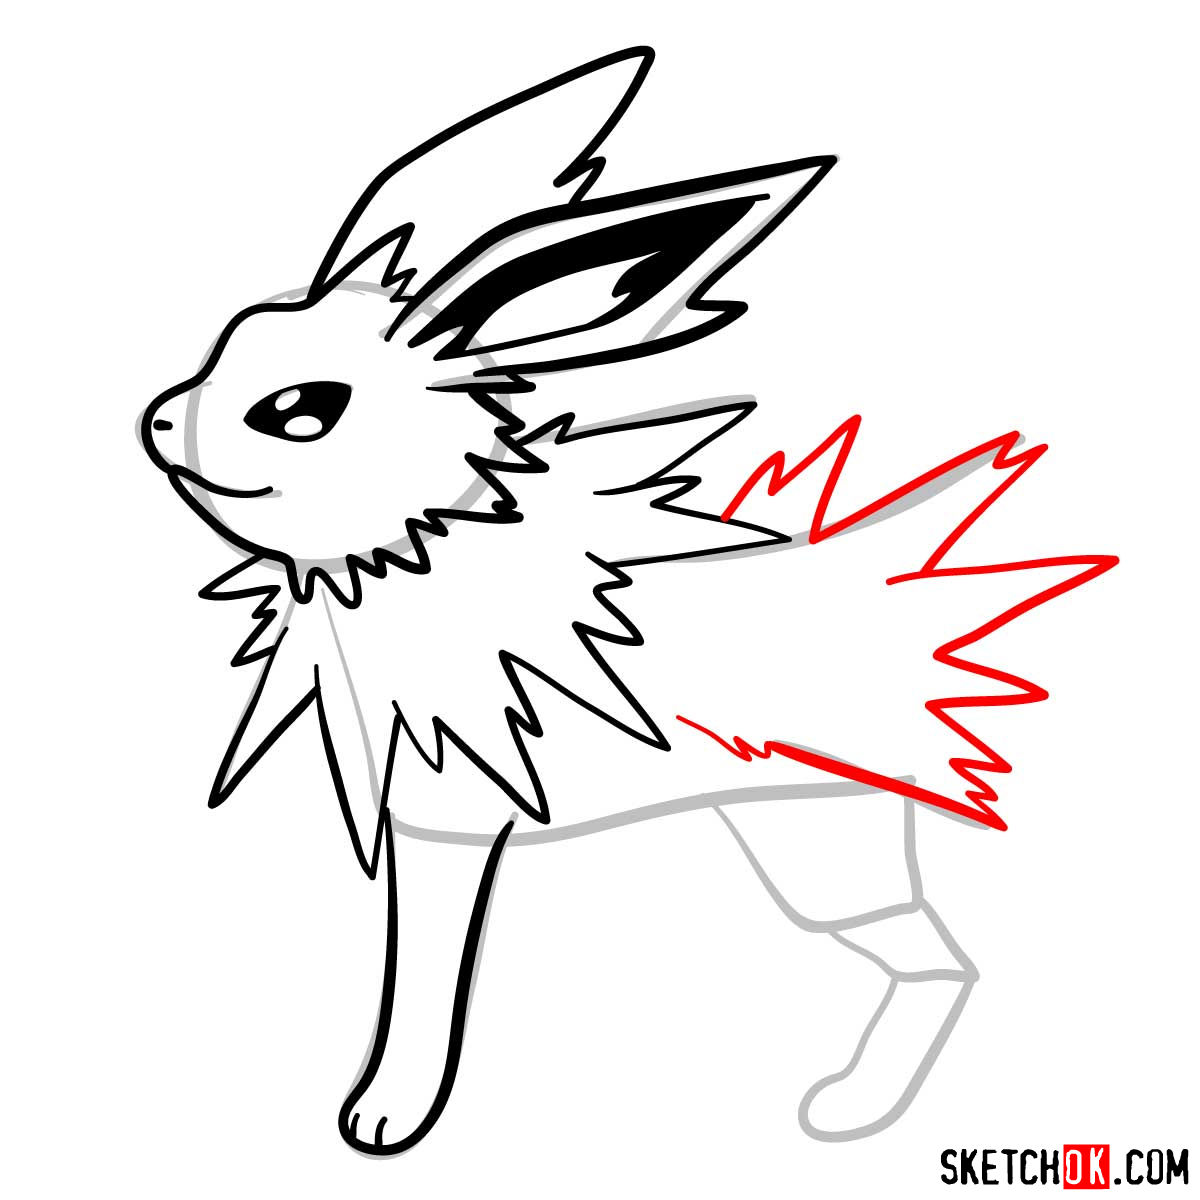 How to draw Jolteon Pokemon Sketchok easy drawing guides